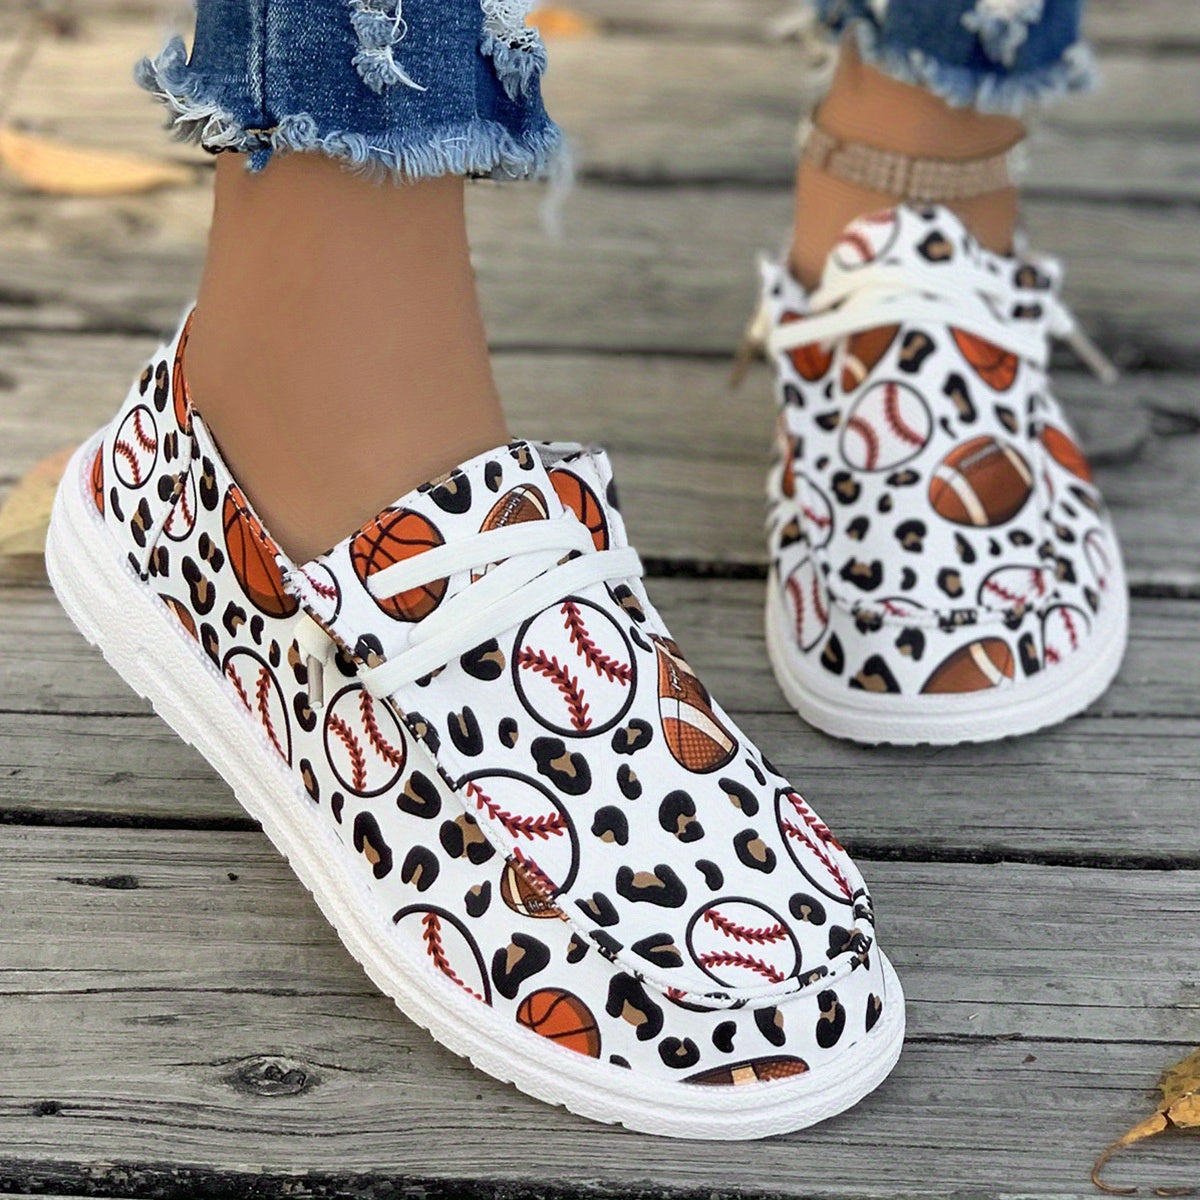 Women's Baseball Print Canvas Shoes, Casual Low Top Flat Walking Sneakers, Lightweight Outdoor Slip On Shoes